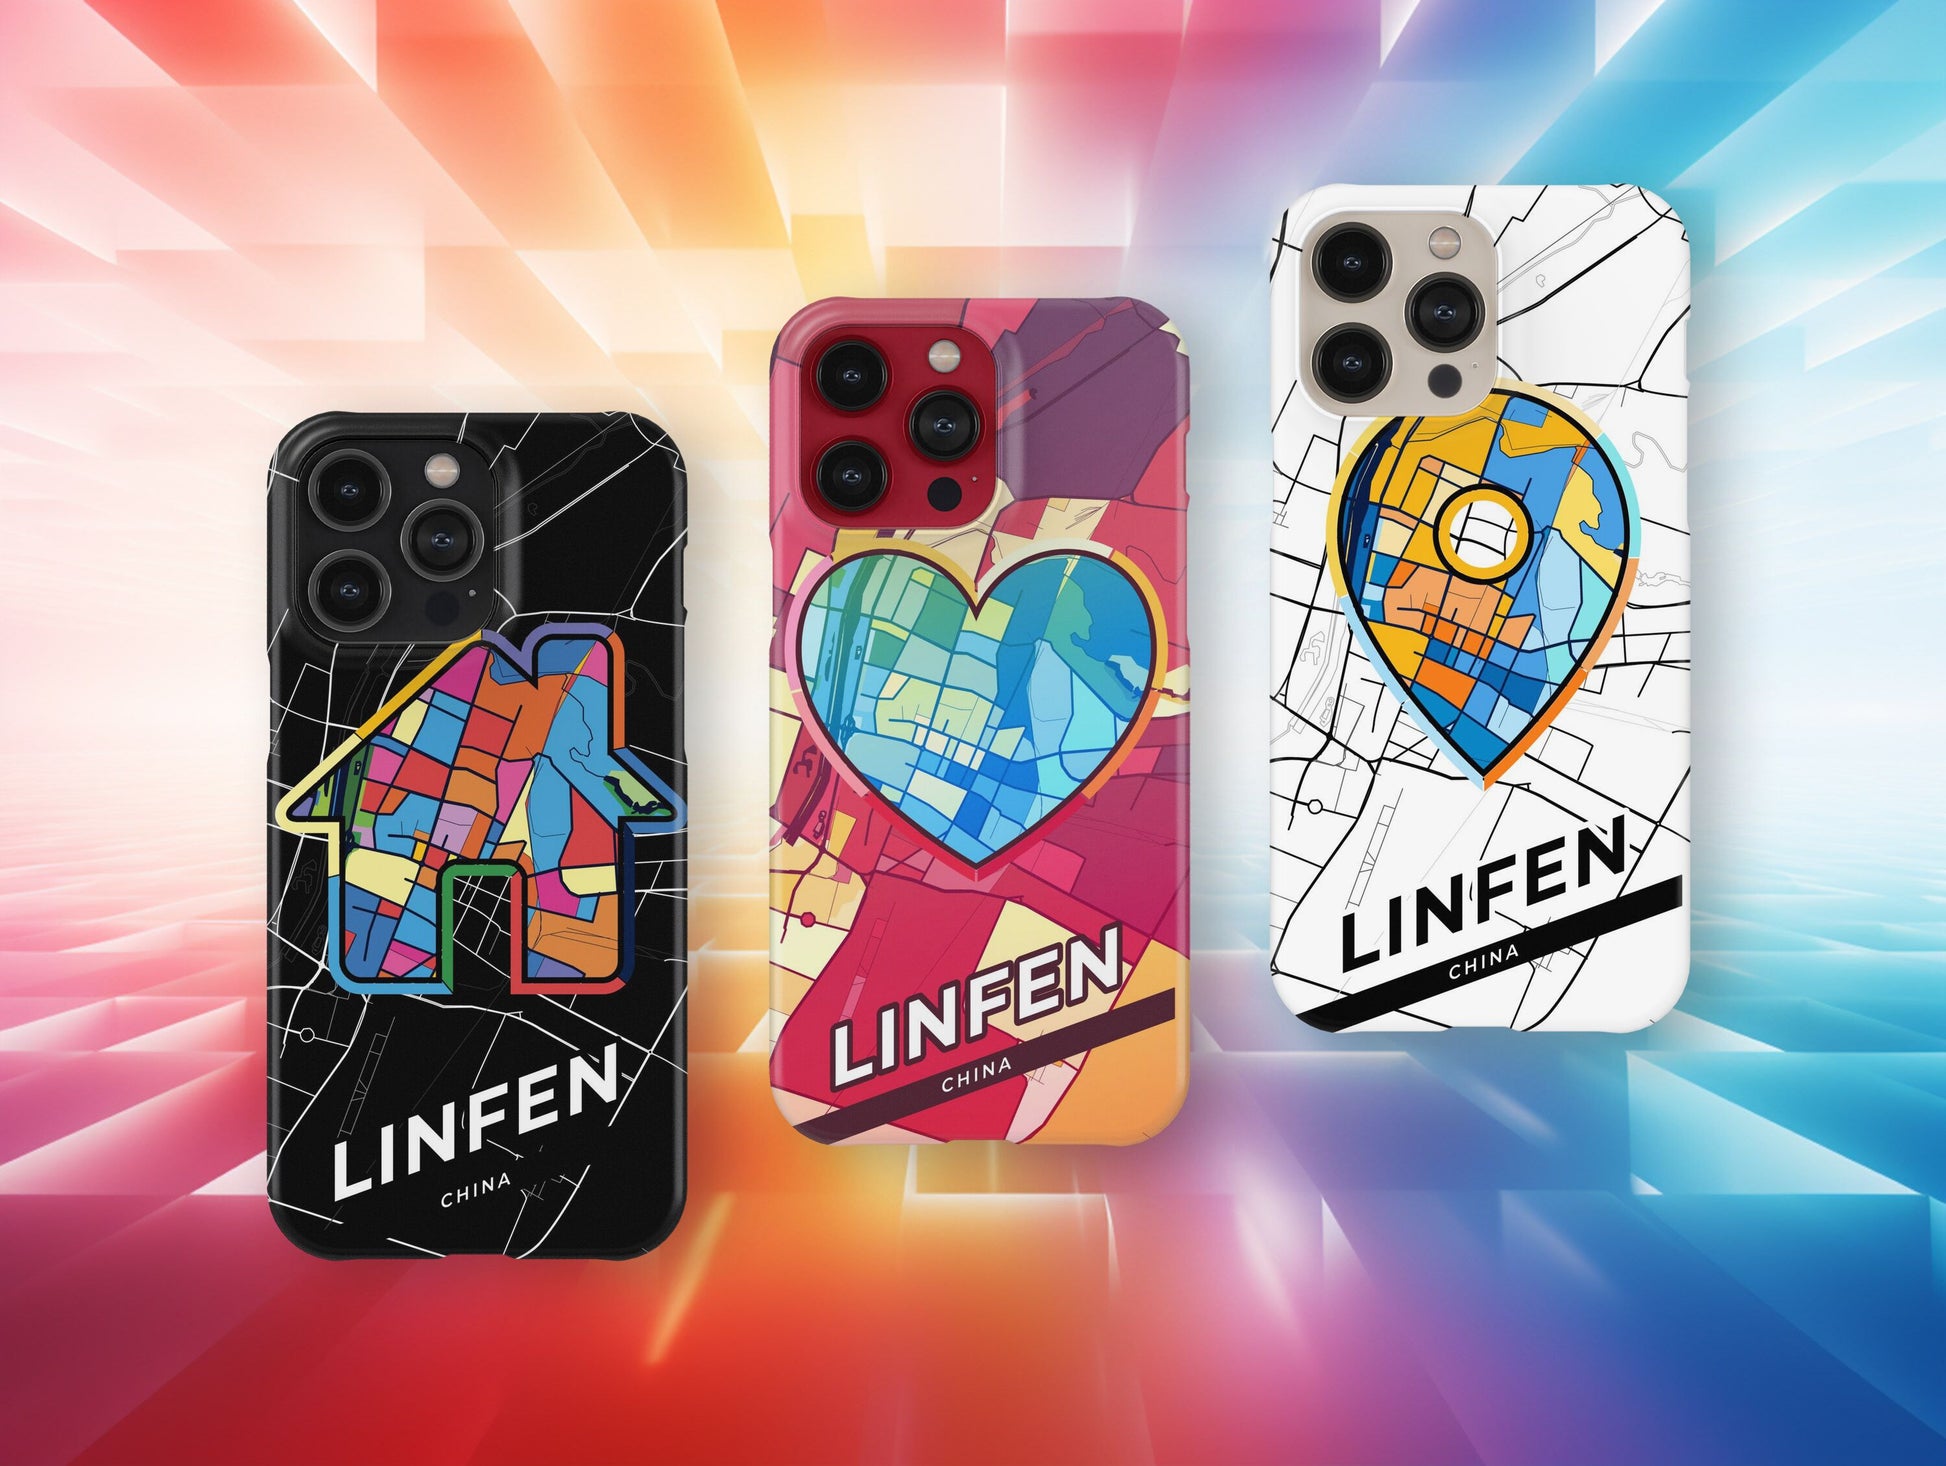 Linfen China slim phone case with colorful icon. Birthday, wedding or housewarming gift. Couple match cases.